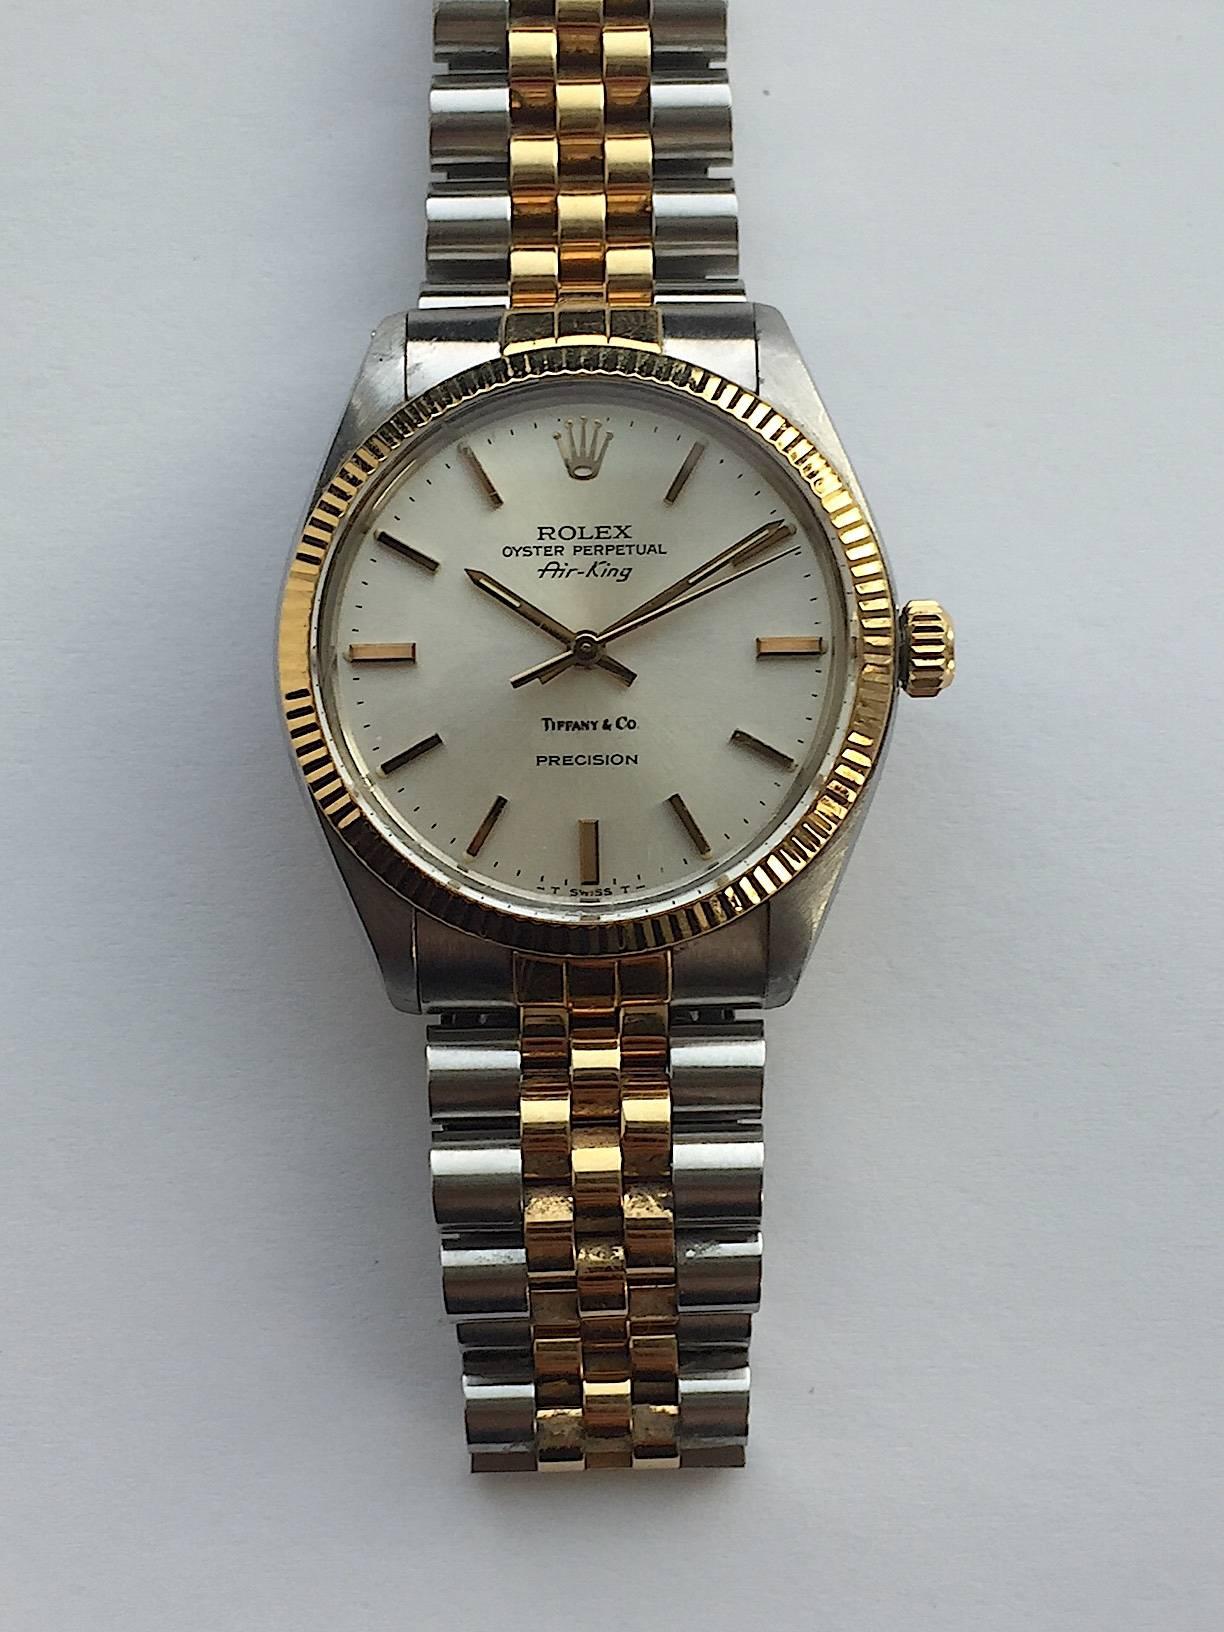 Rolex Stainless Steel and Yellow Gold Oyster Perpetual Air-King Watch
Beautiful Factory Silver Dial Marked Tiffany & Co. 
This Watch Was Originally Retailed At Tiffany & Co.
Yellow Gold Gold Fluted Bezel
Stainless Steel Case
34mm in size 
Features